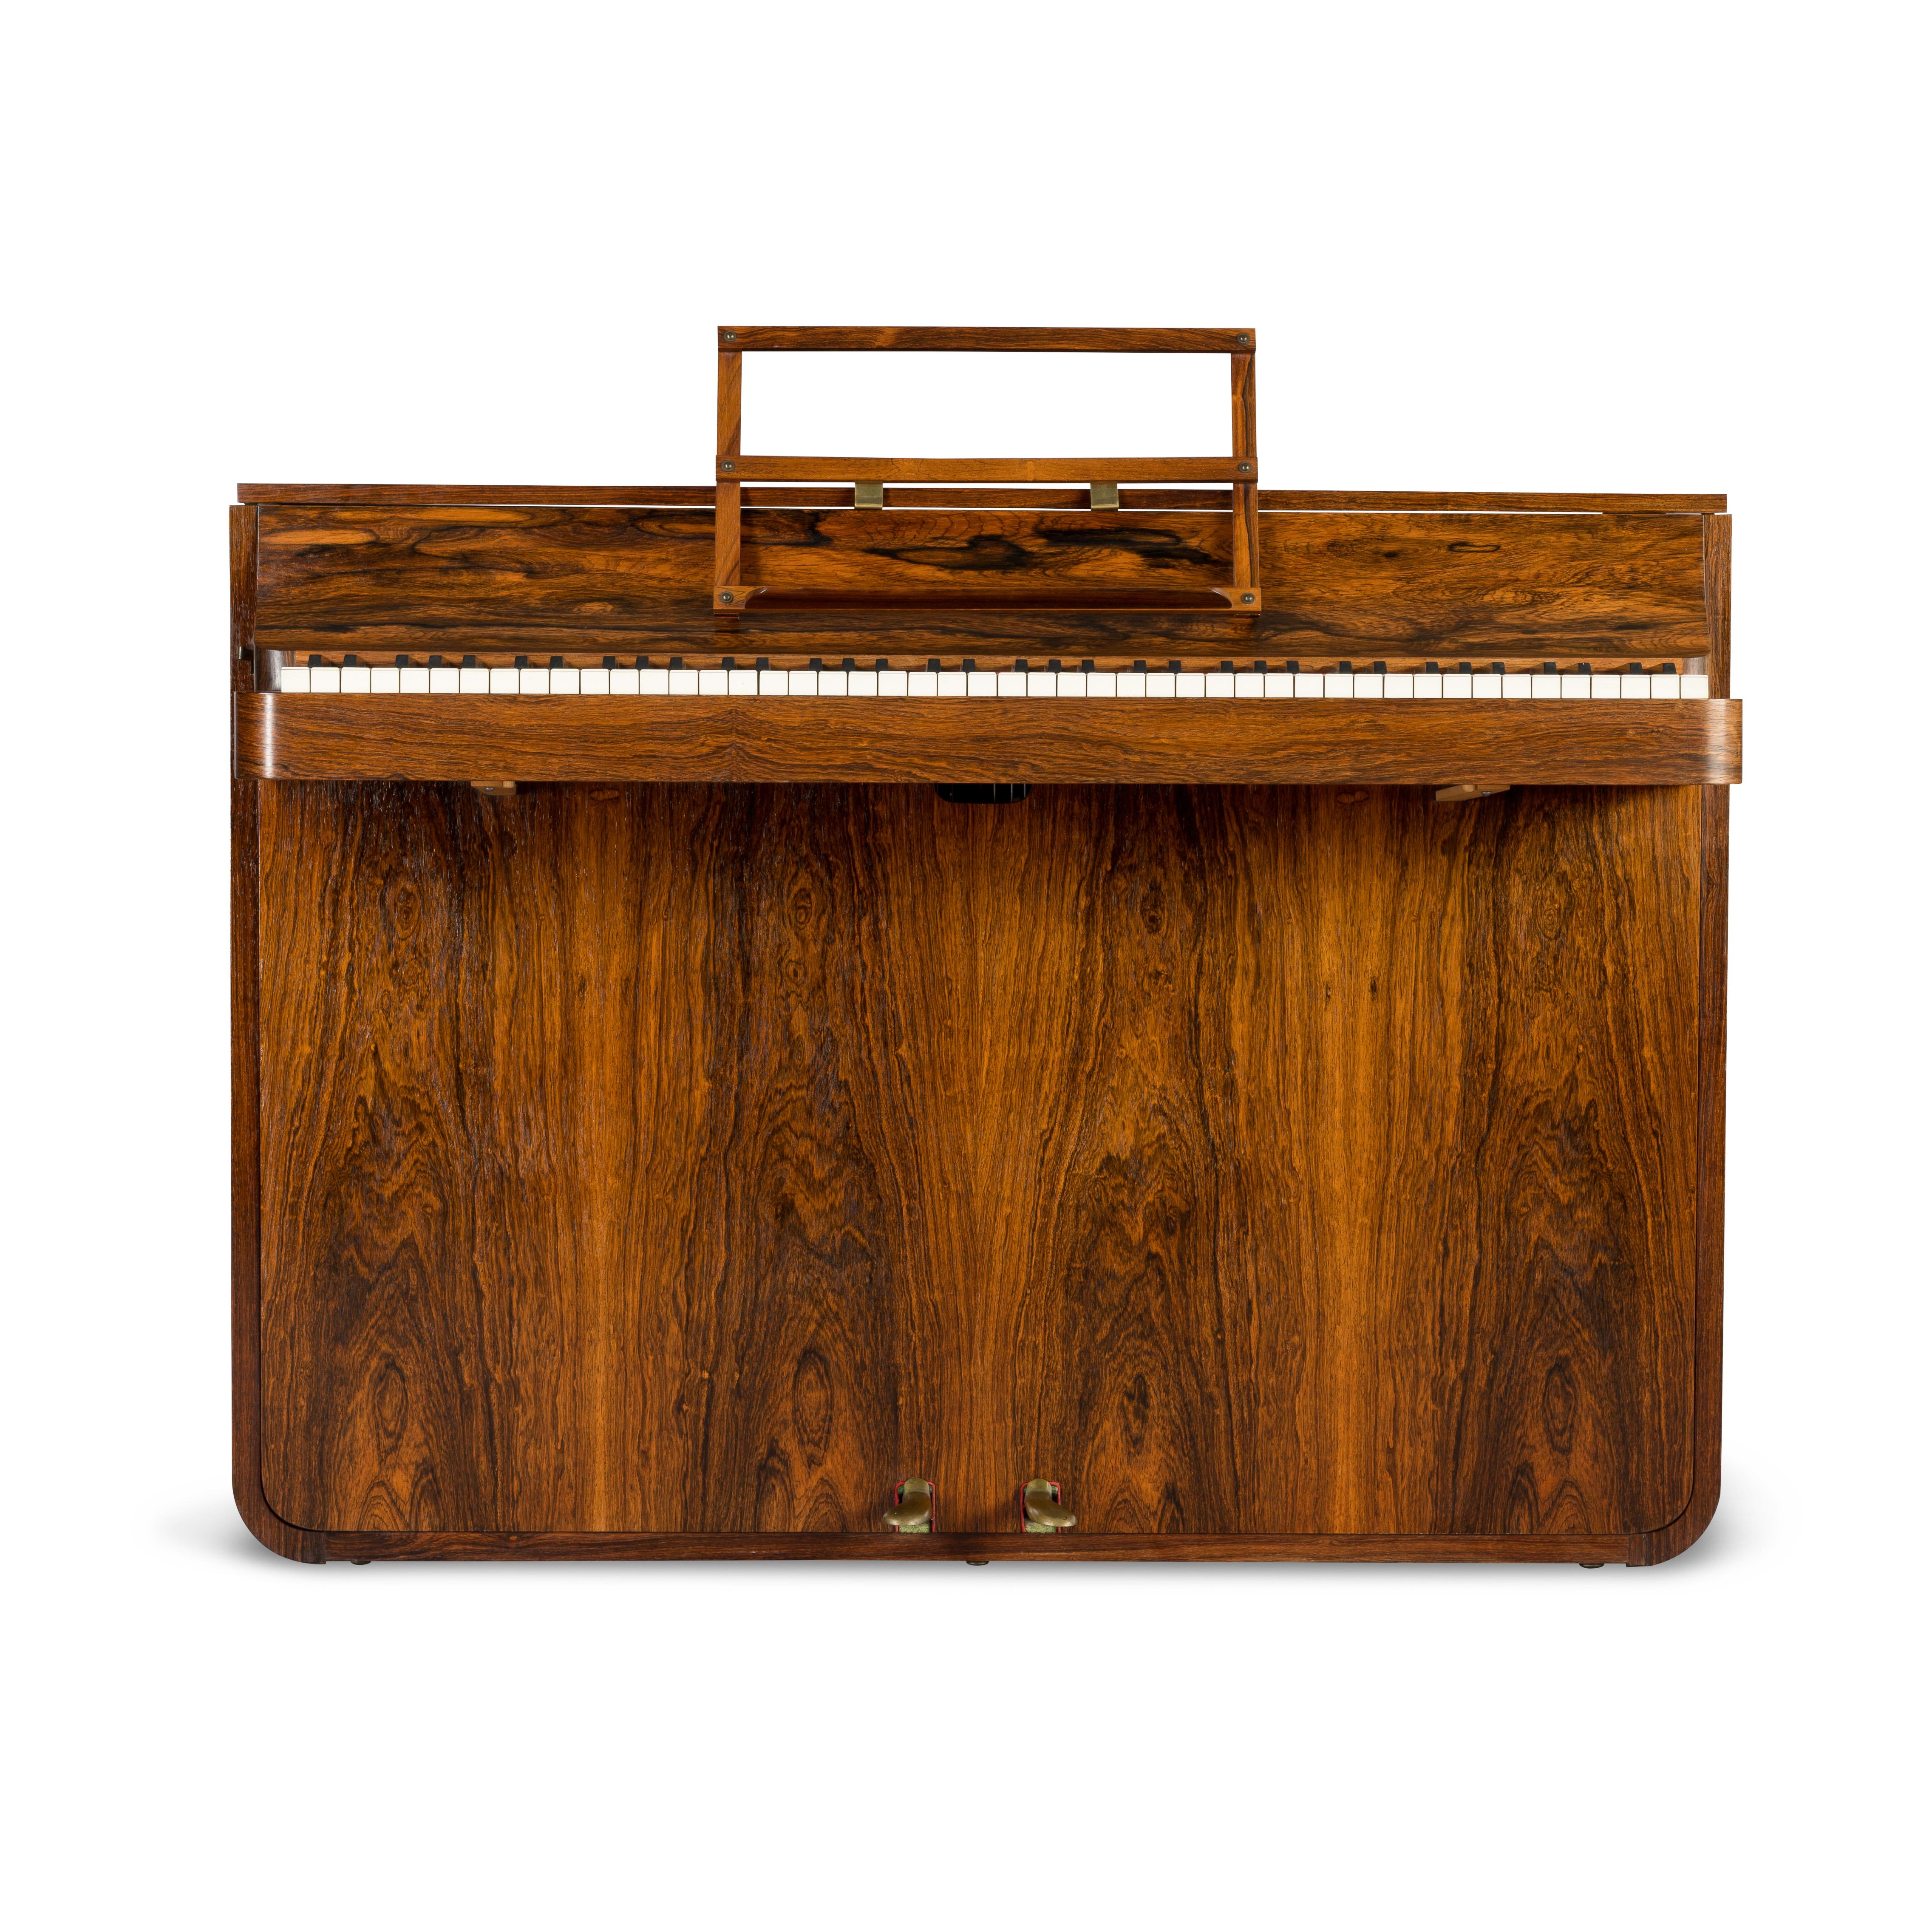 A rare Danish midcentury pianette made of magnificent rosewood. It is called pianette due to the 82 keys rather than the standard 88 of a full size piano. This pianette is made by renowned piano maker Louis Zwicki. Every piano from Louis Zwicki is